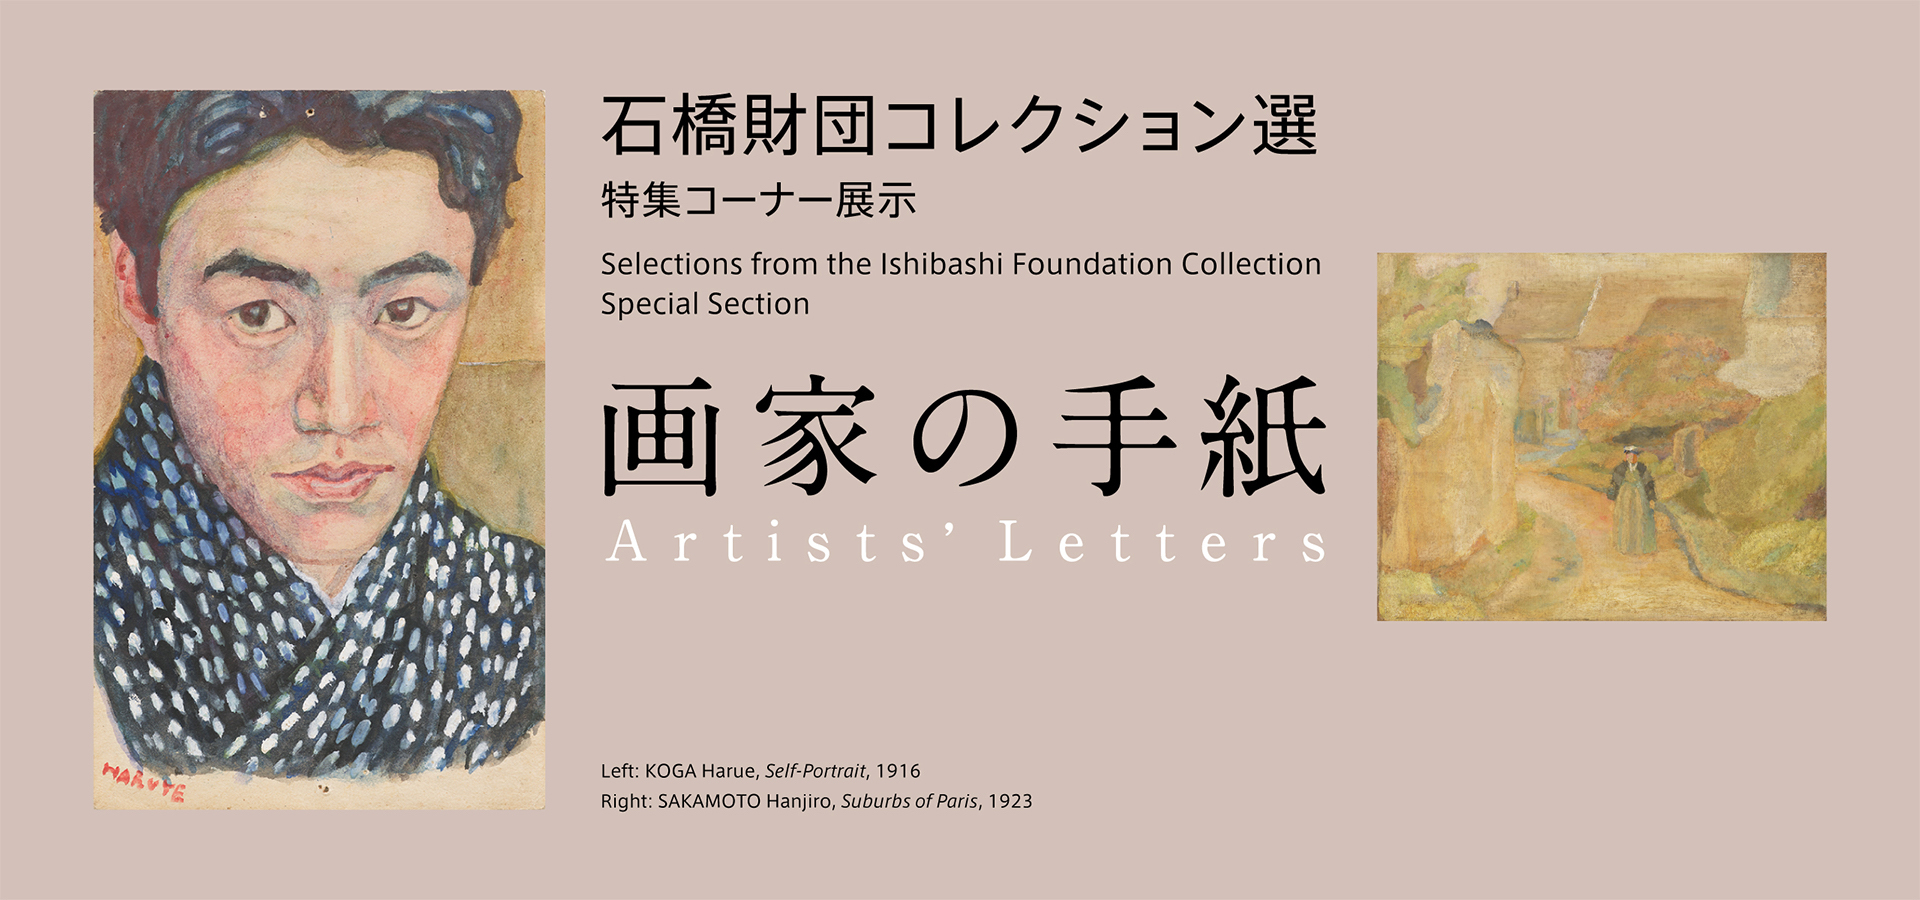 Selections from the Ishibashi Foundation Collection　Special Section　Artists’ Letters